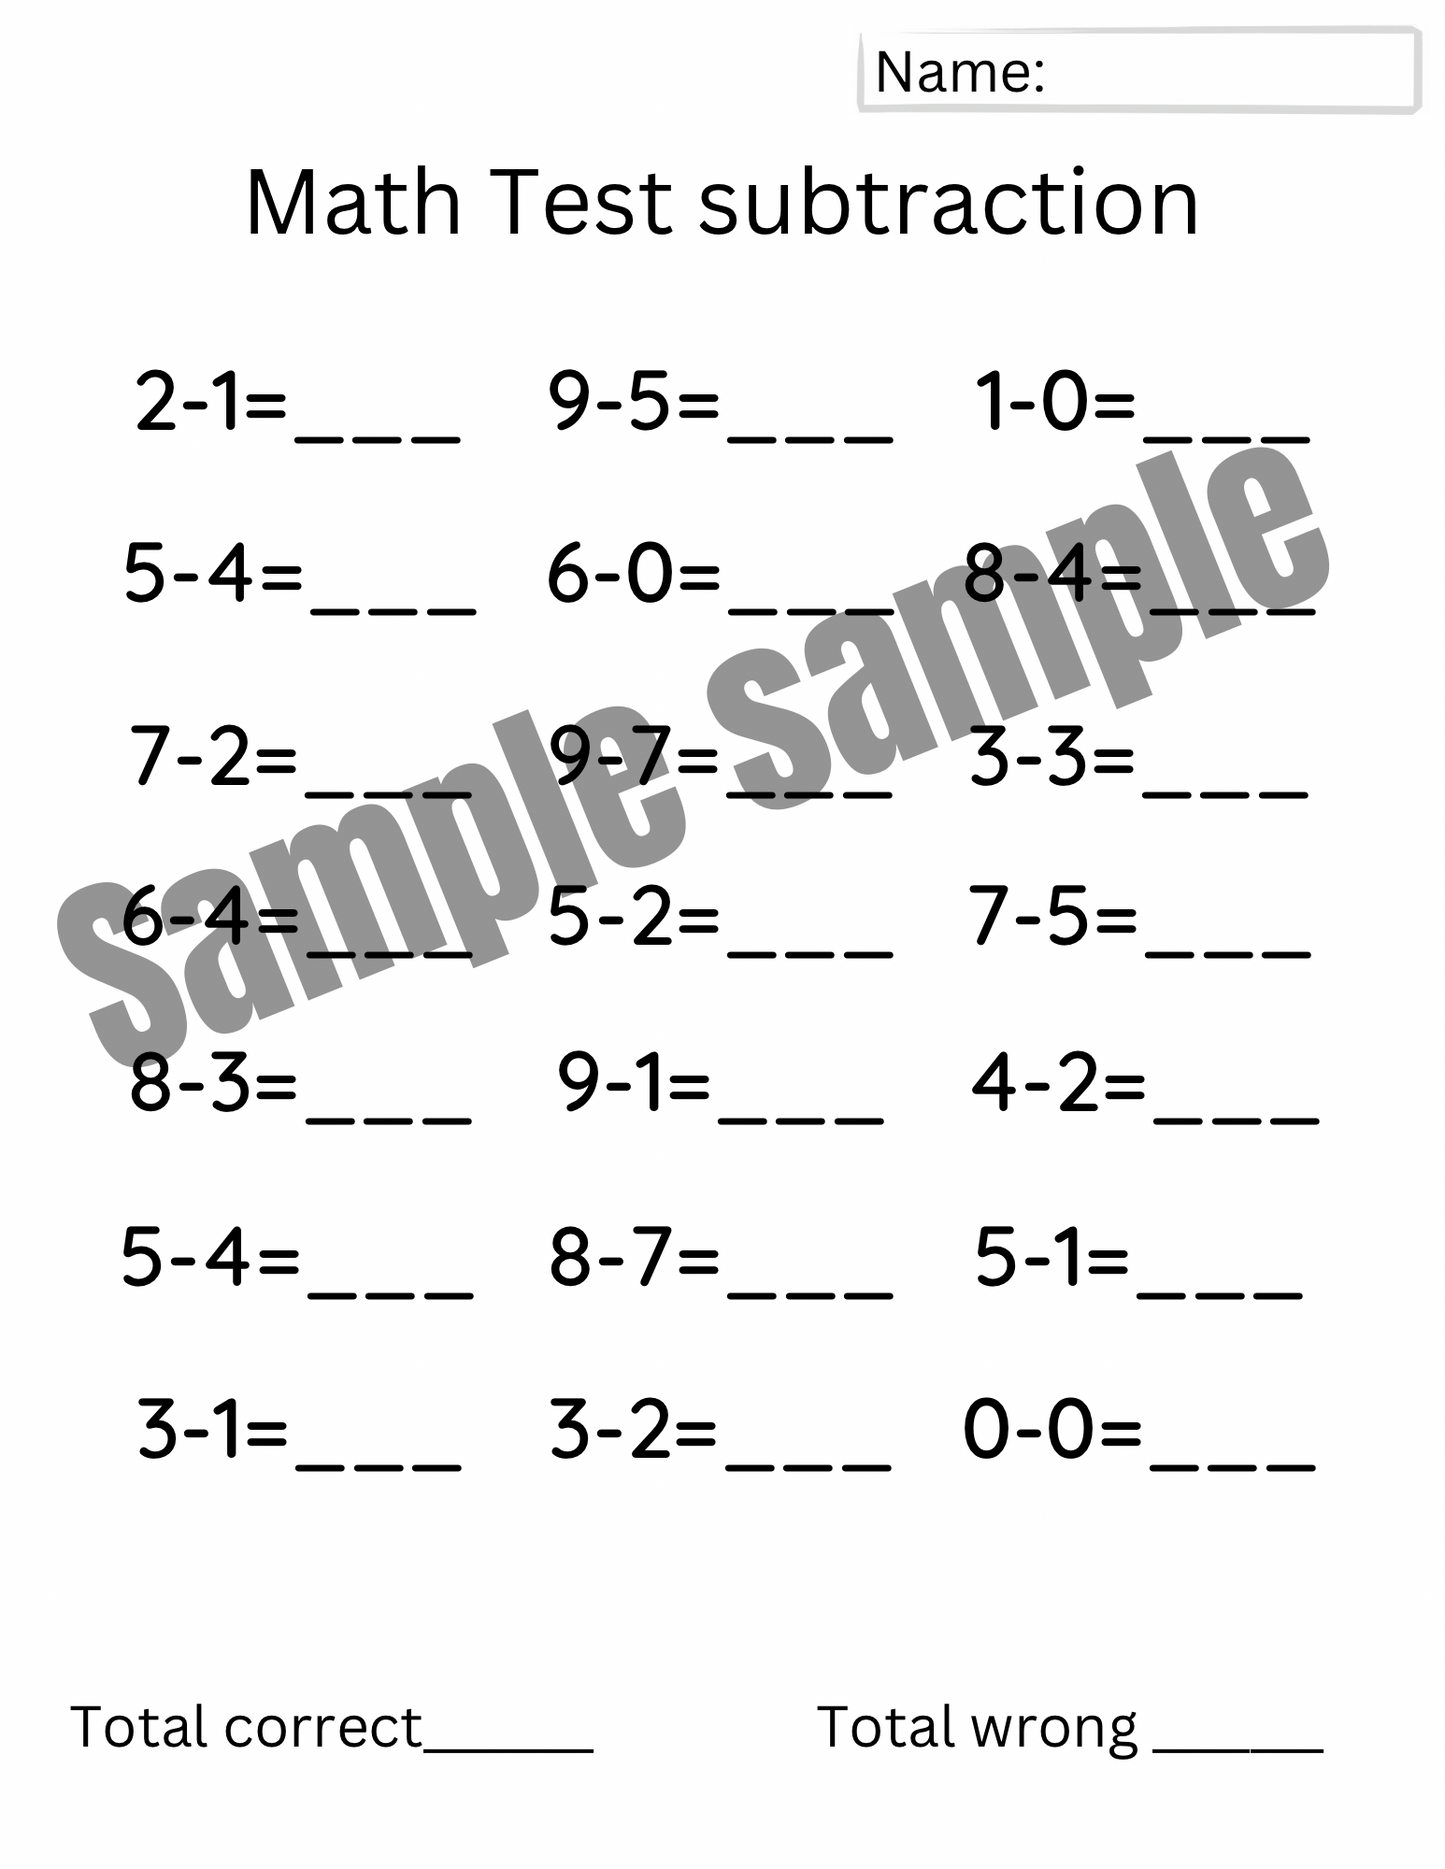 Short Addition and Subtraction Math Test